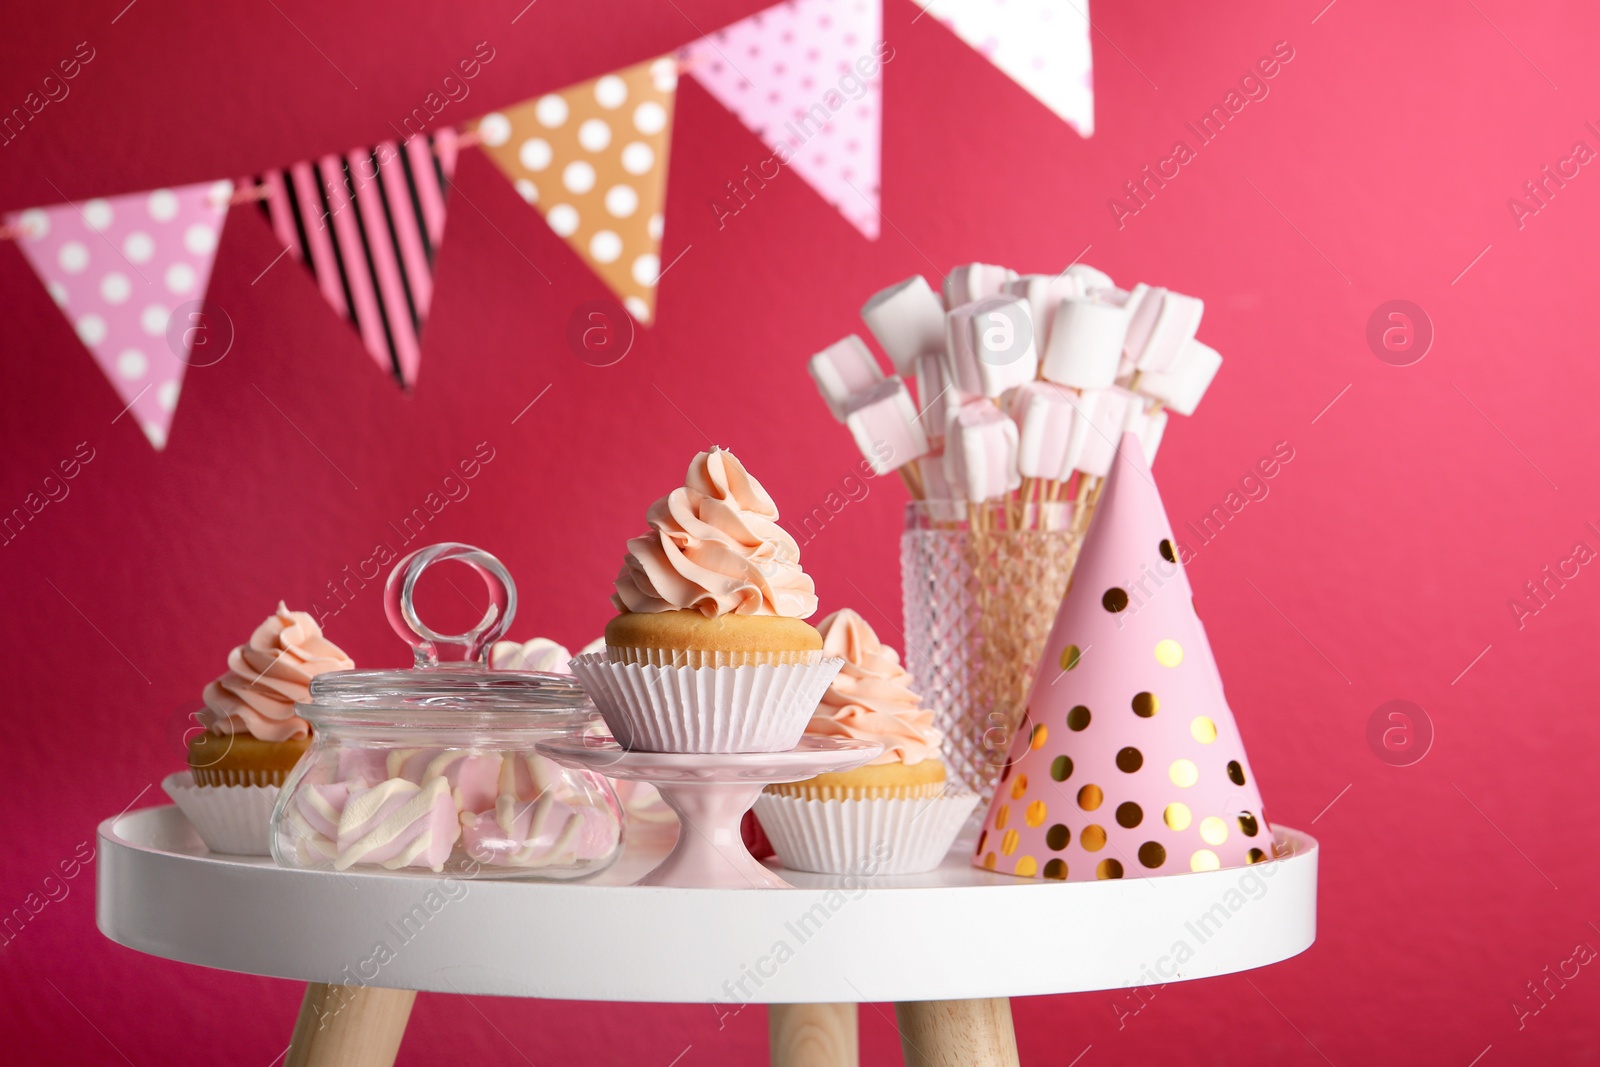 Photo of Table with party hat, cupcake and other sweets on burgundy background. Candy bar